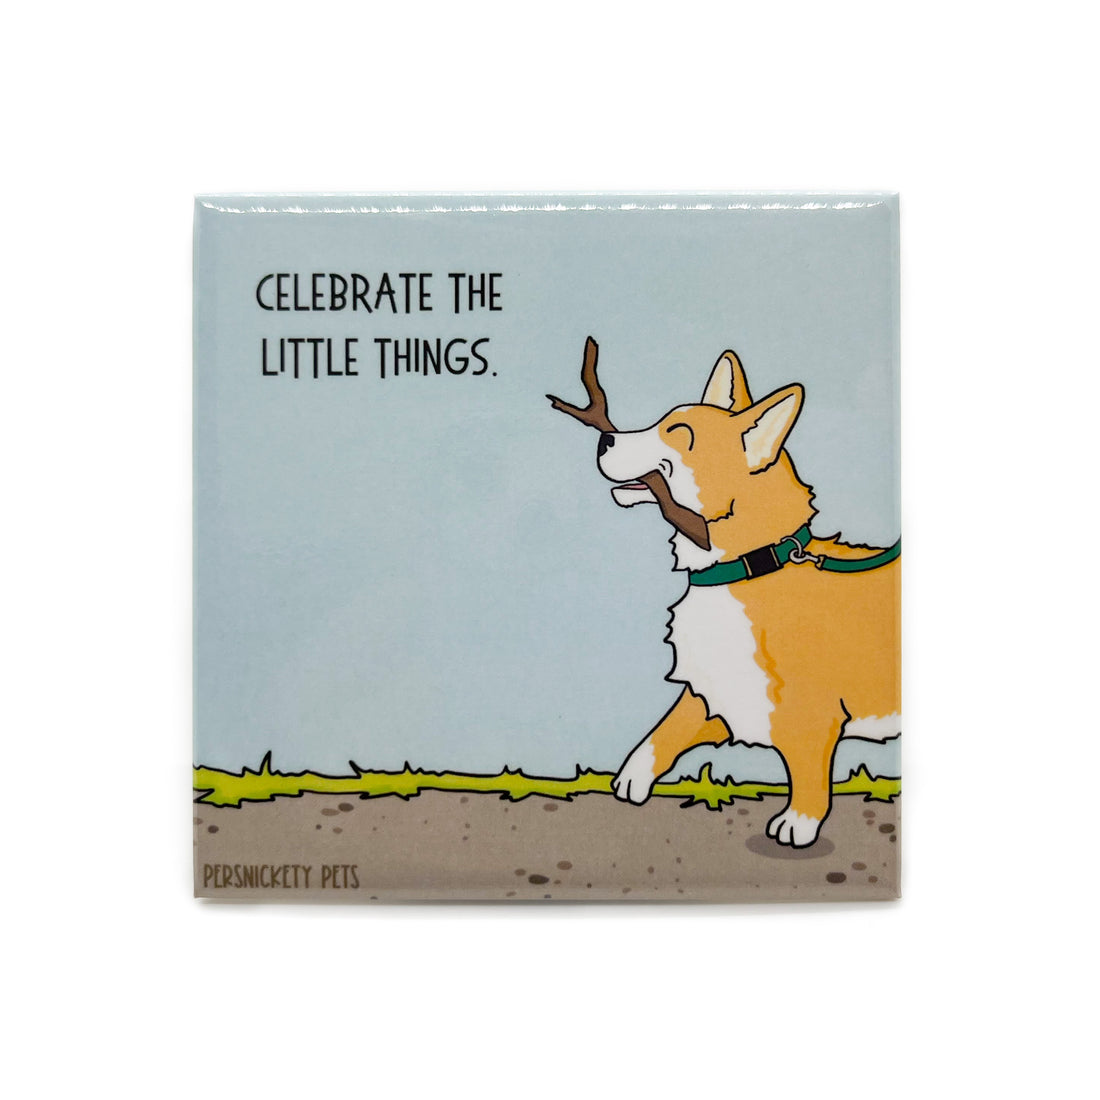 Persnickety Pets: Celebrate the Little Things fridge magnet 